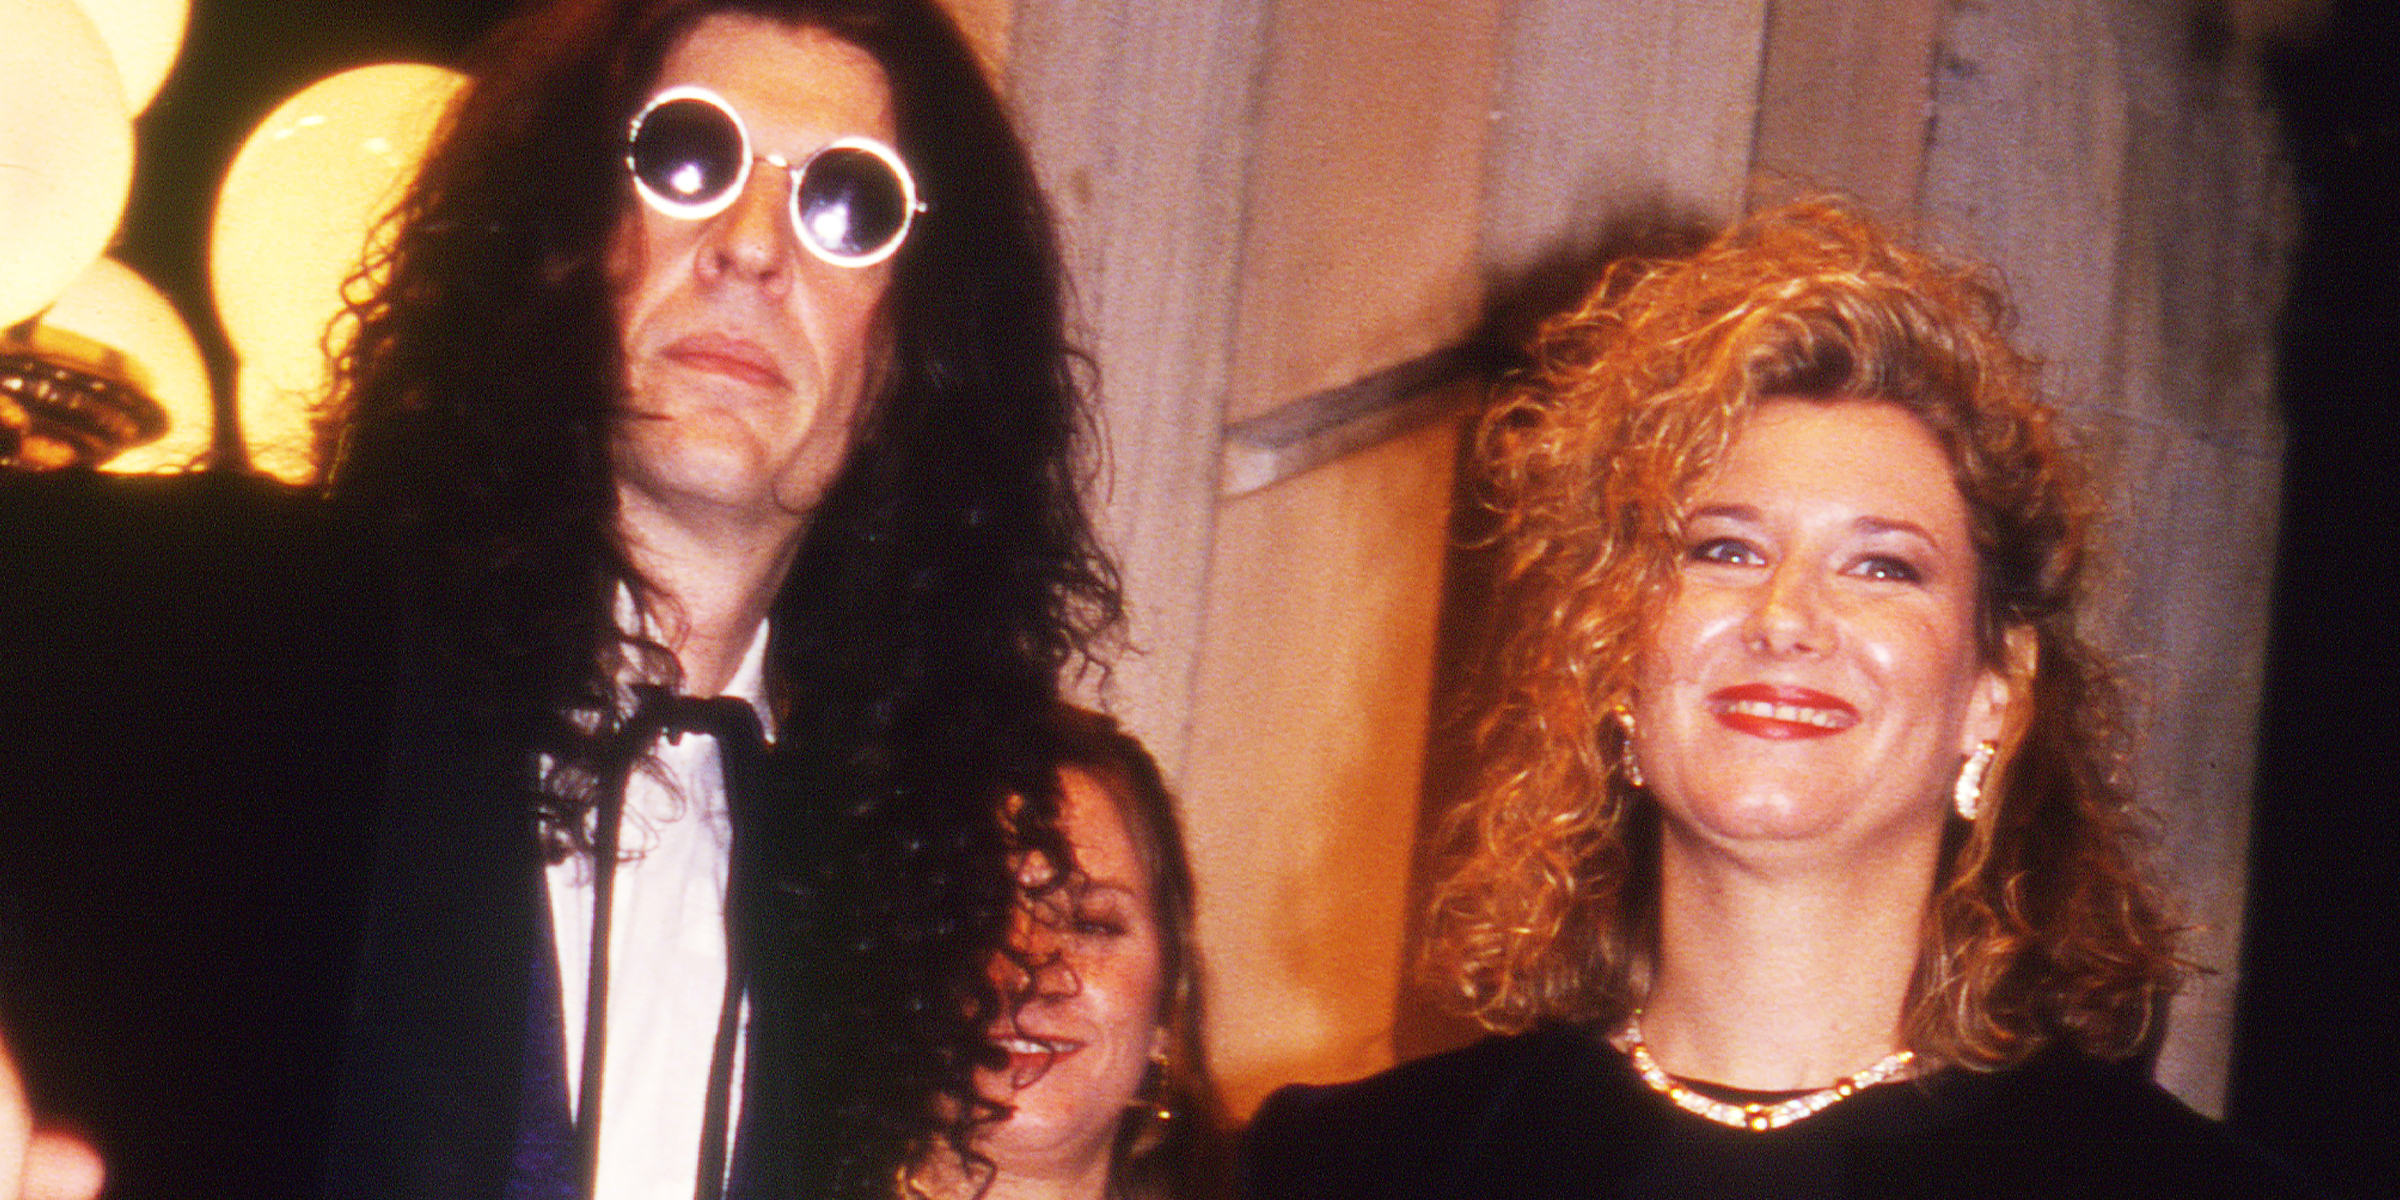 Howard Stern and Alison Stern, 1993 | Source: Getty Images